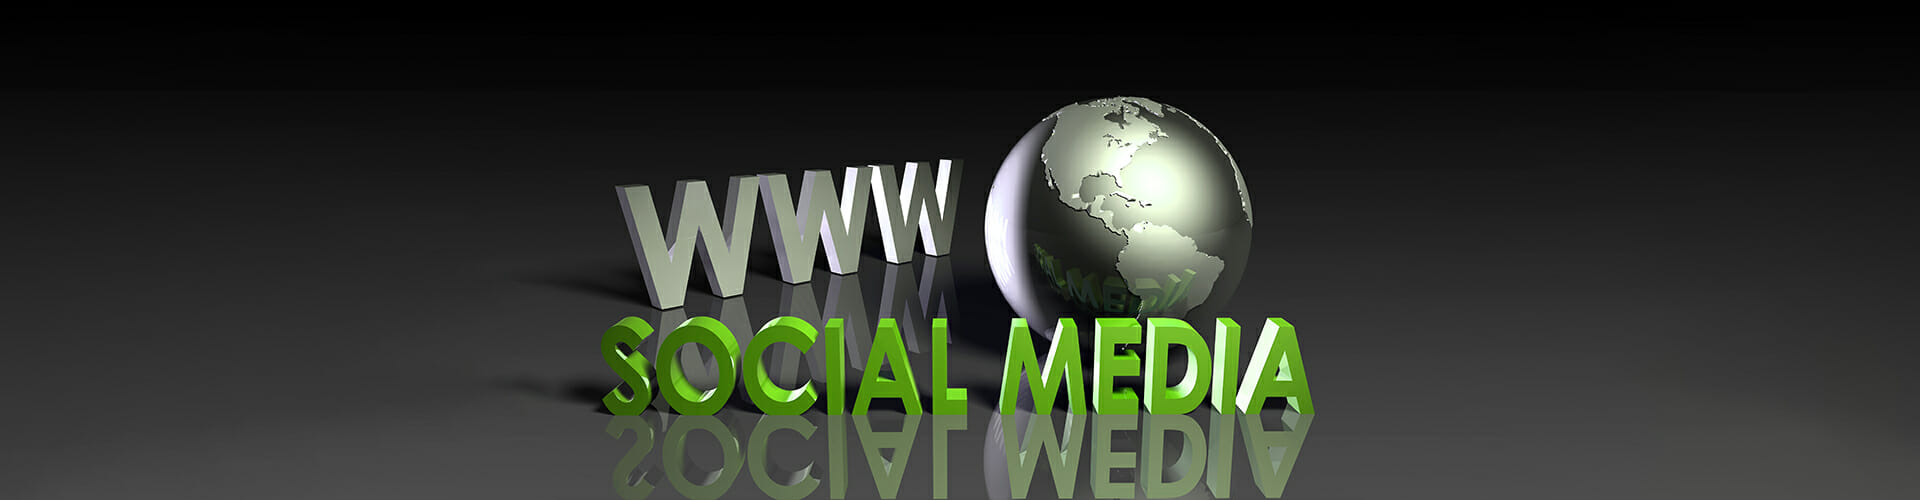 4 Ways to Use Social Media to Drive Traffic to Your Website